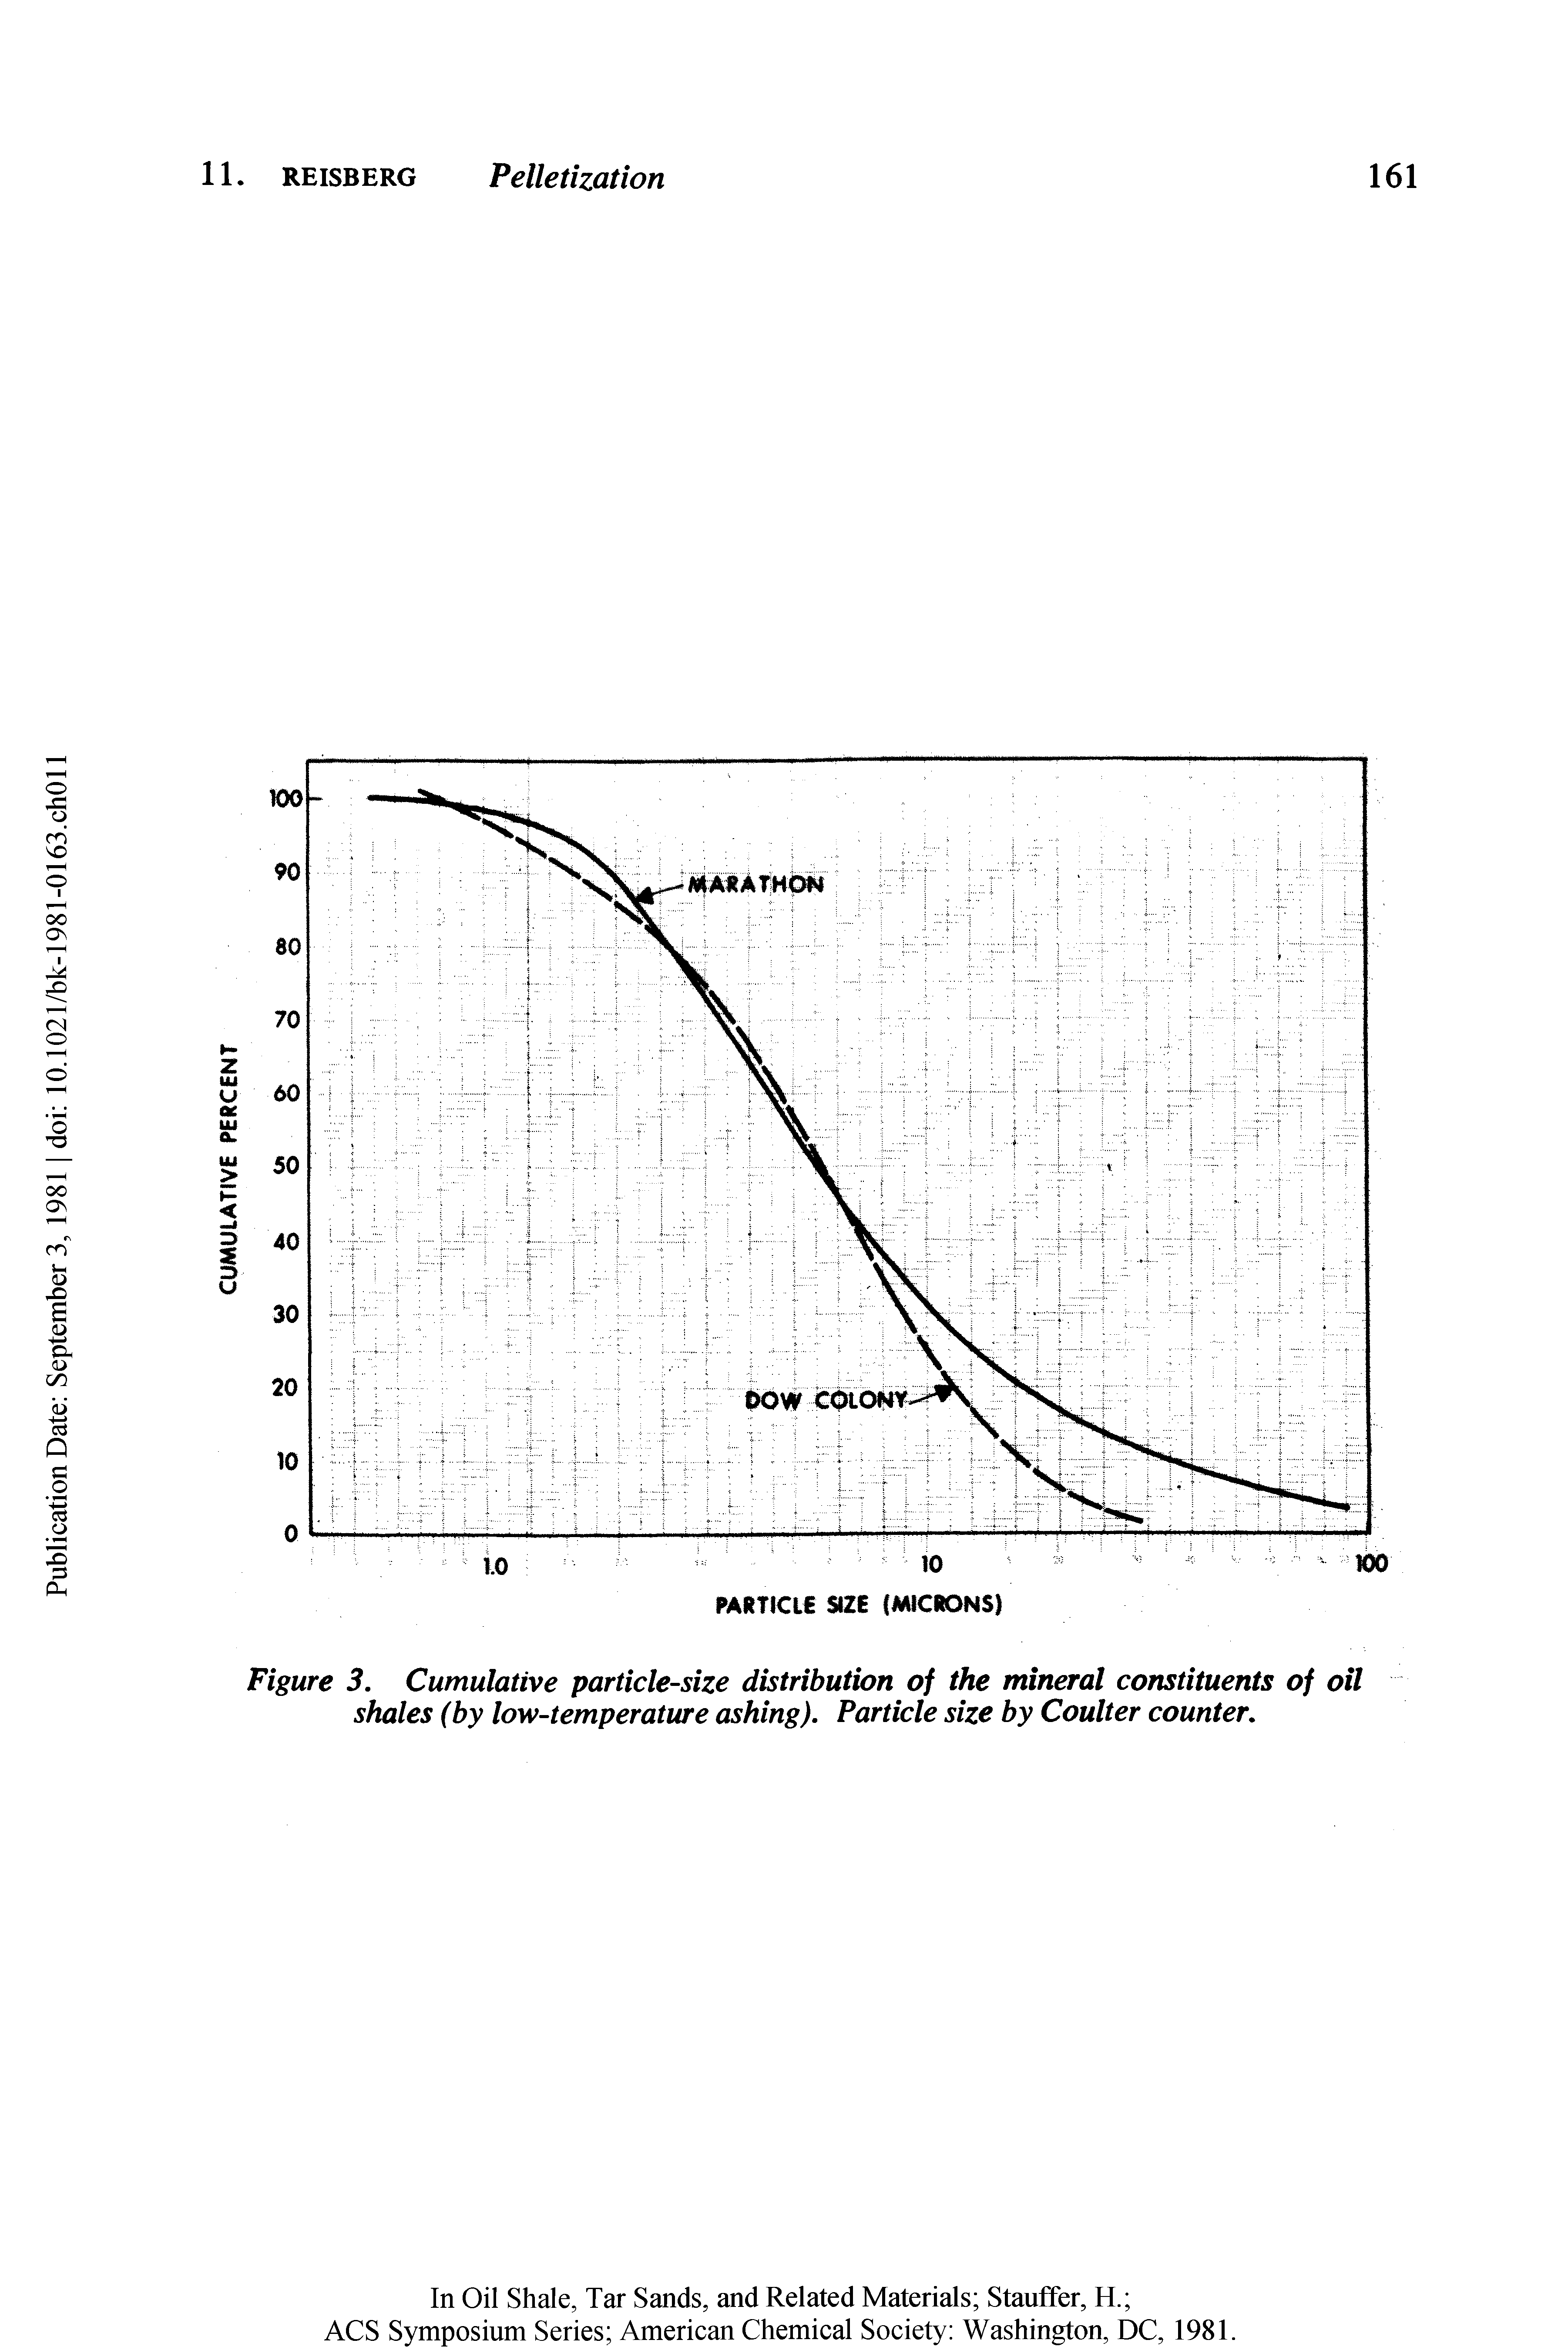 Figure 3. Cumulative particle-size distribution of the mineral constituents of oil shales (by low-temperature ashing). Particle size by Coulter counter.